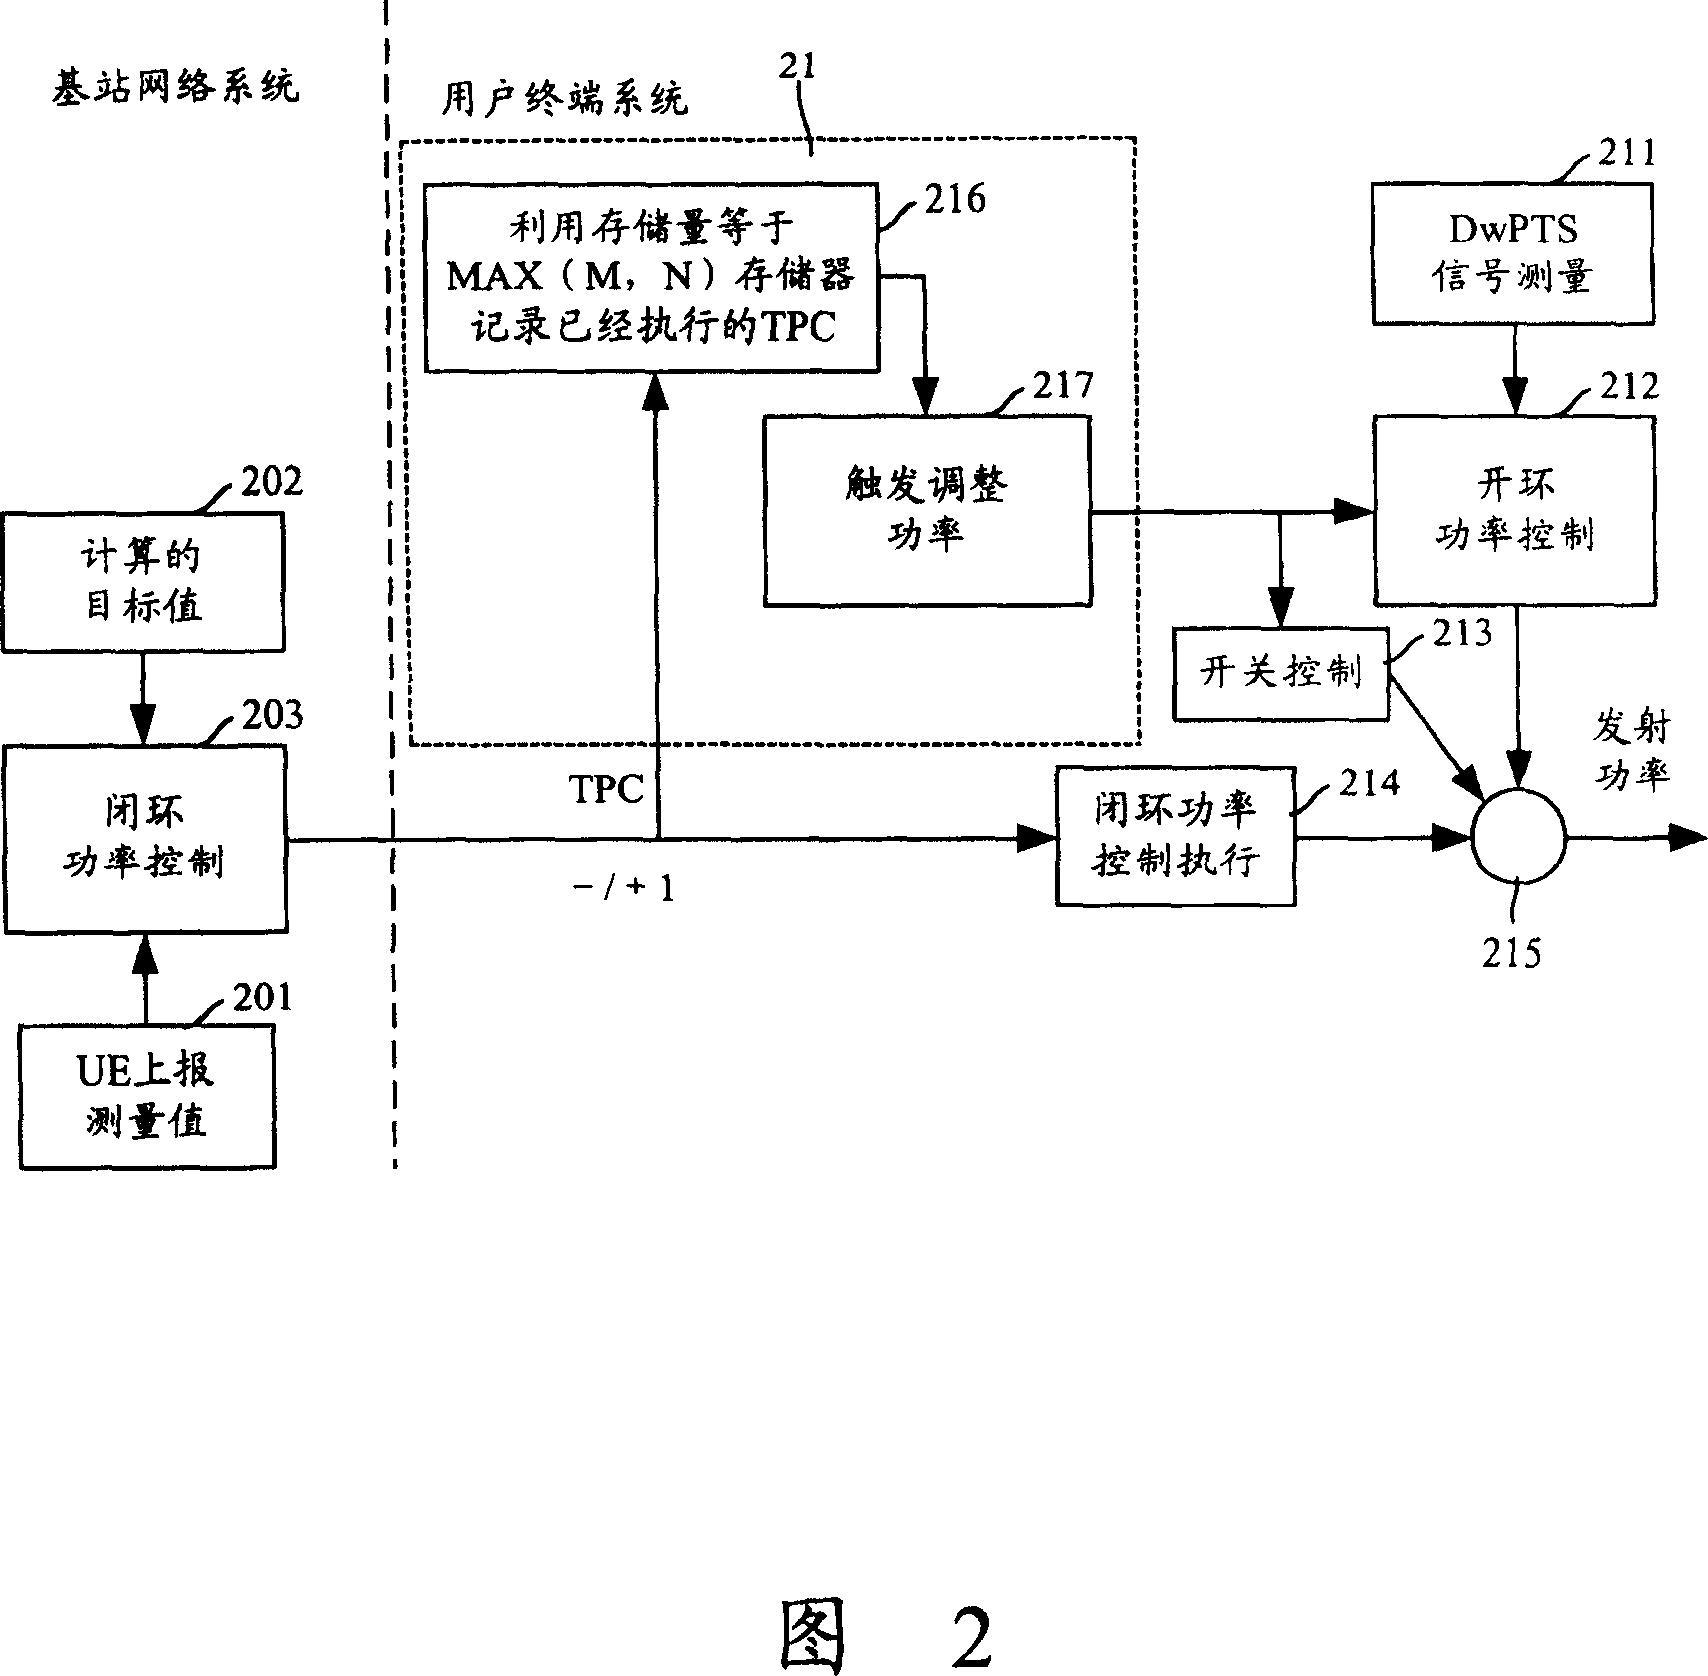 Power control method for mobile communication system